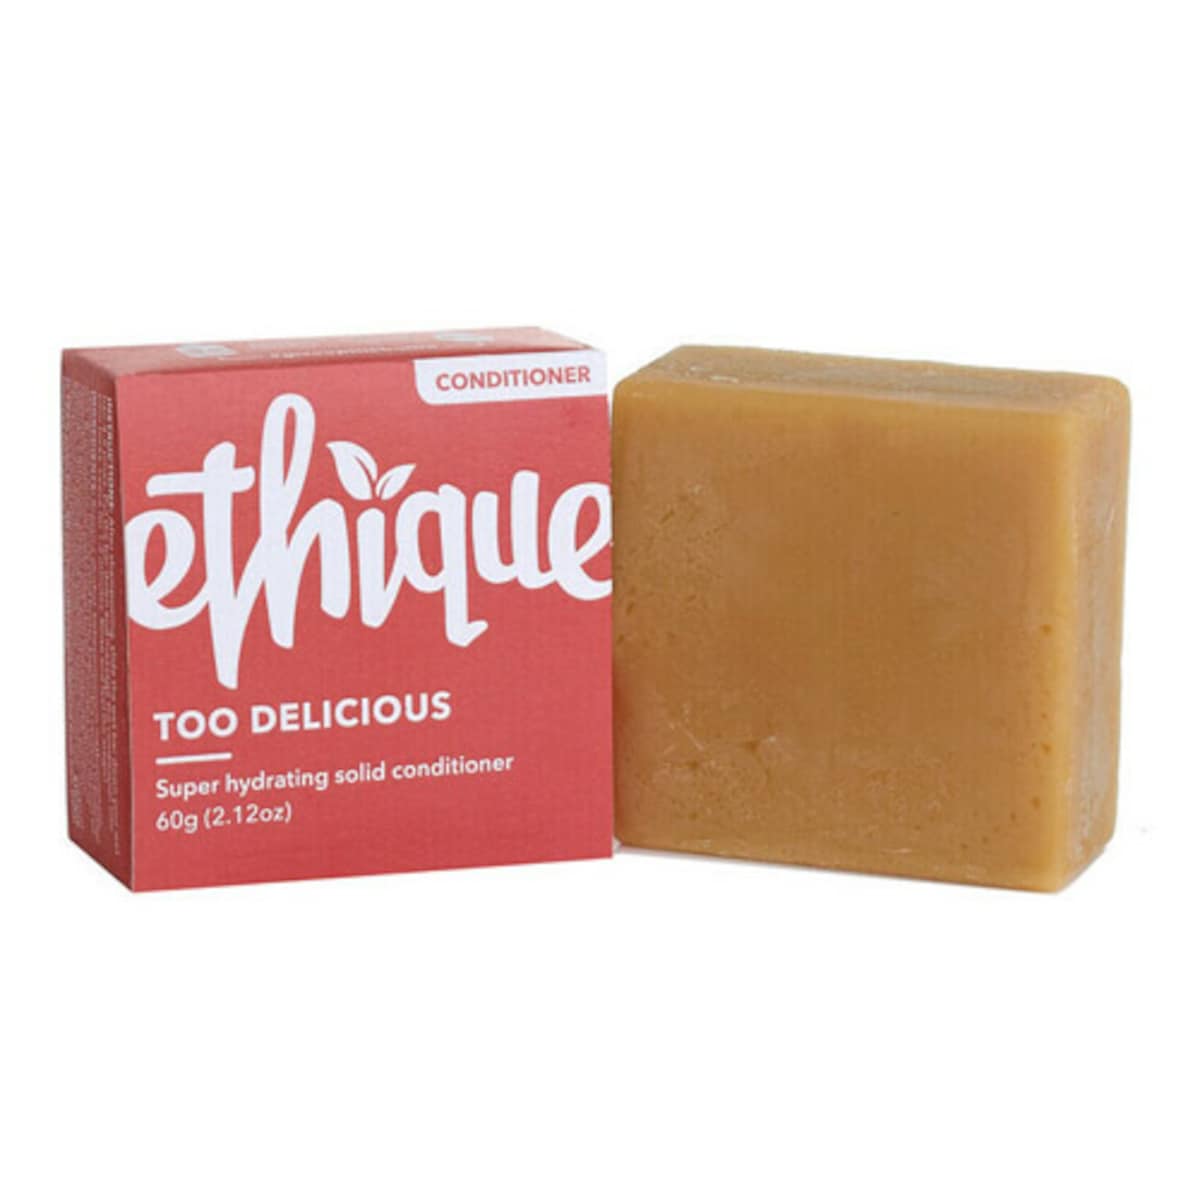 ETHIQUE Solid Conditioner Bar Too Delicious Super Hydrating 60g